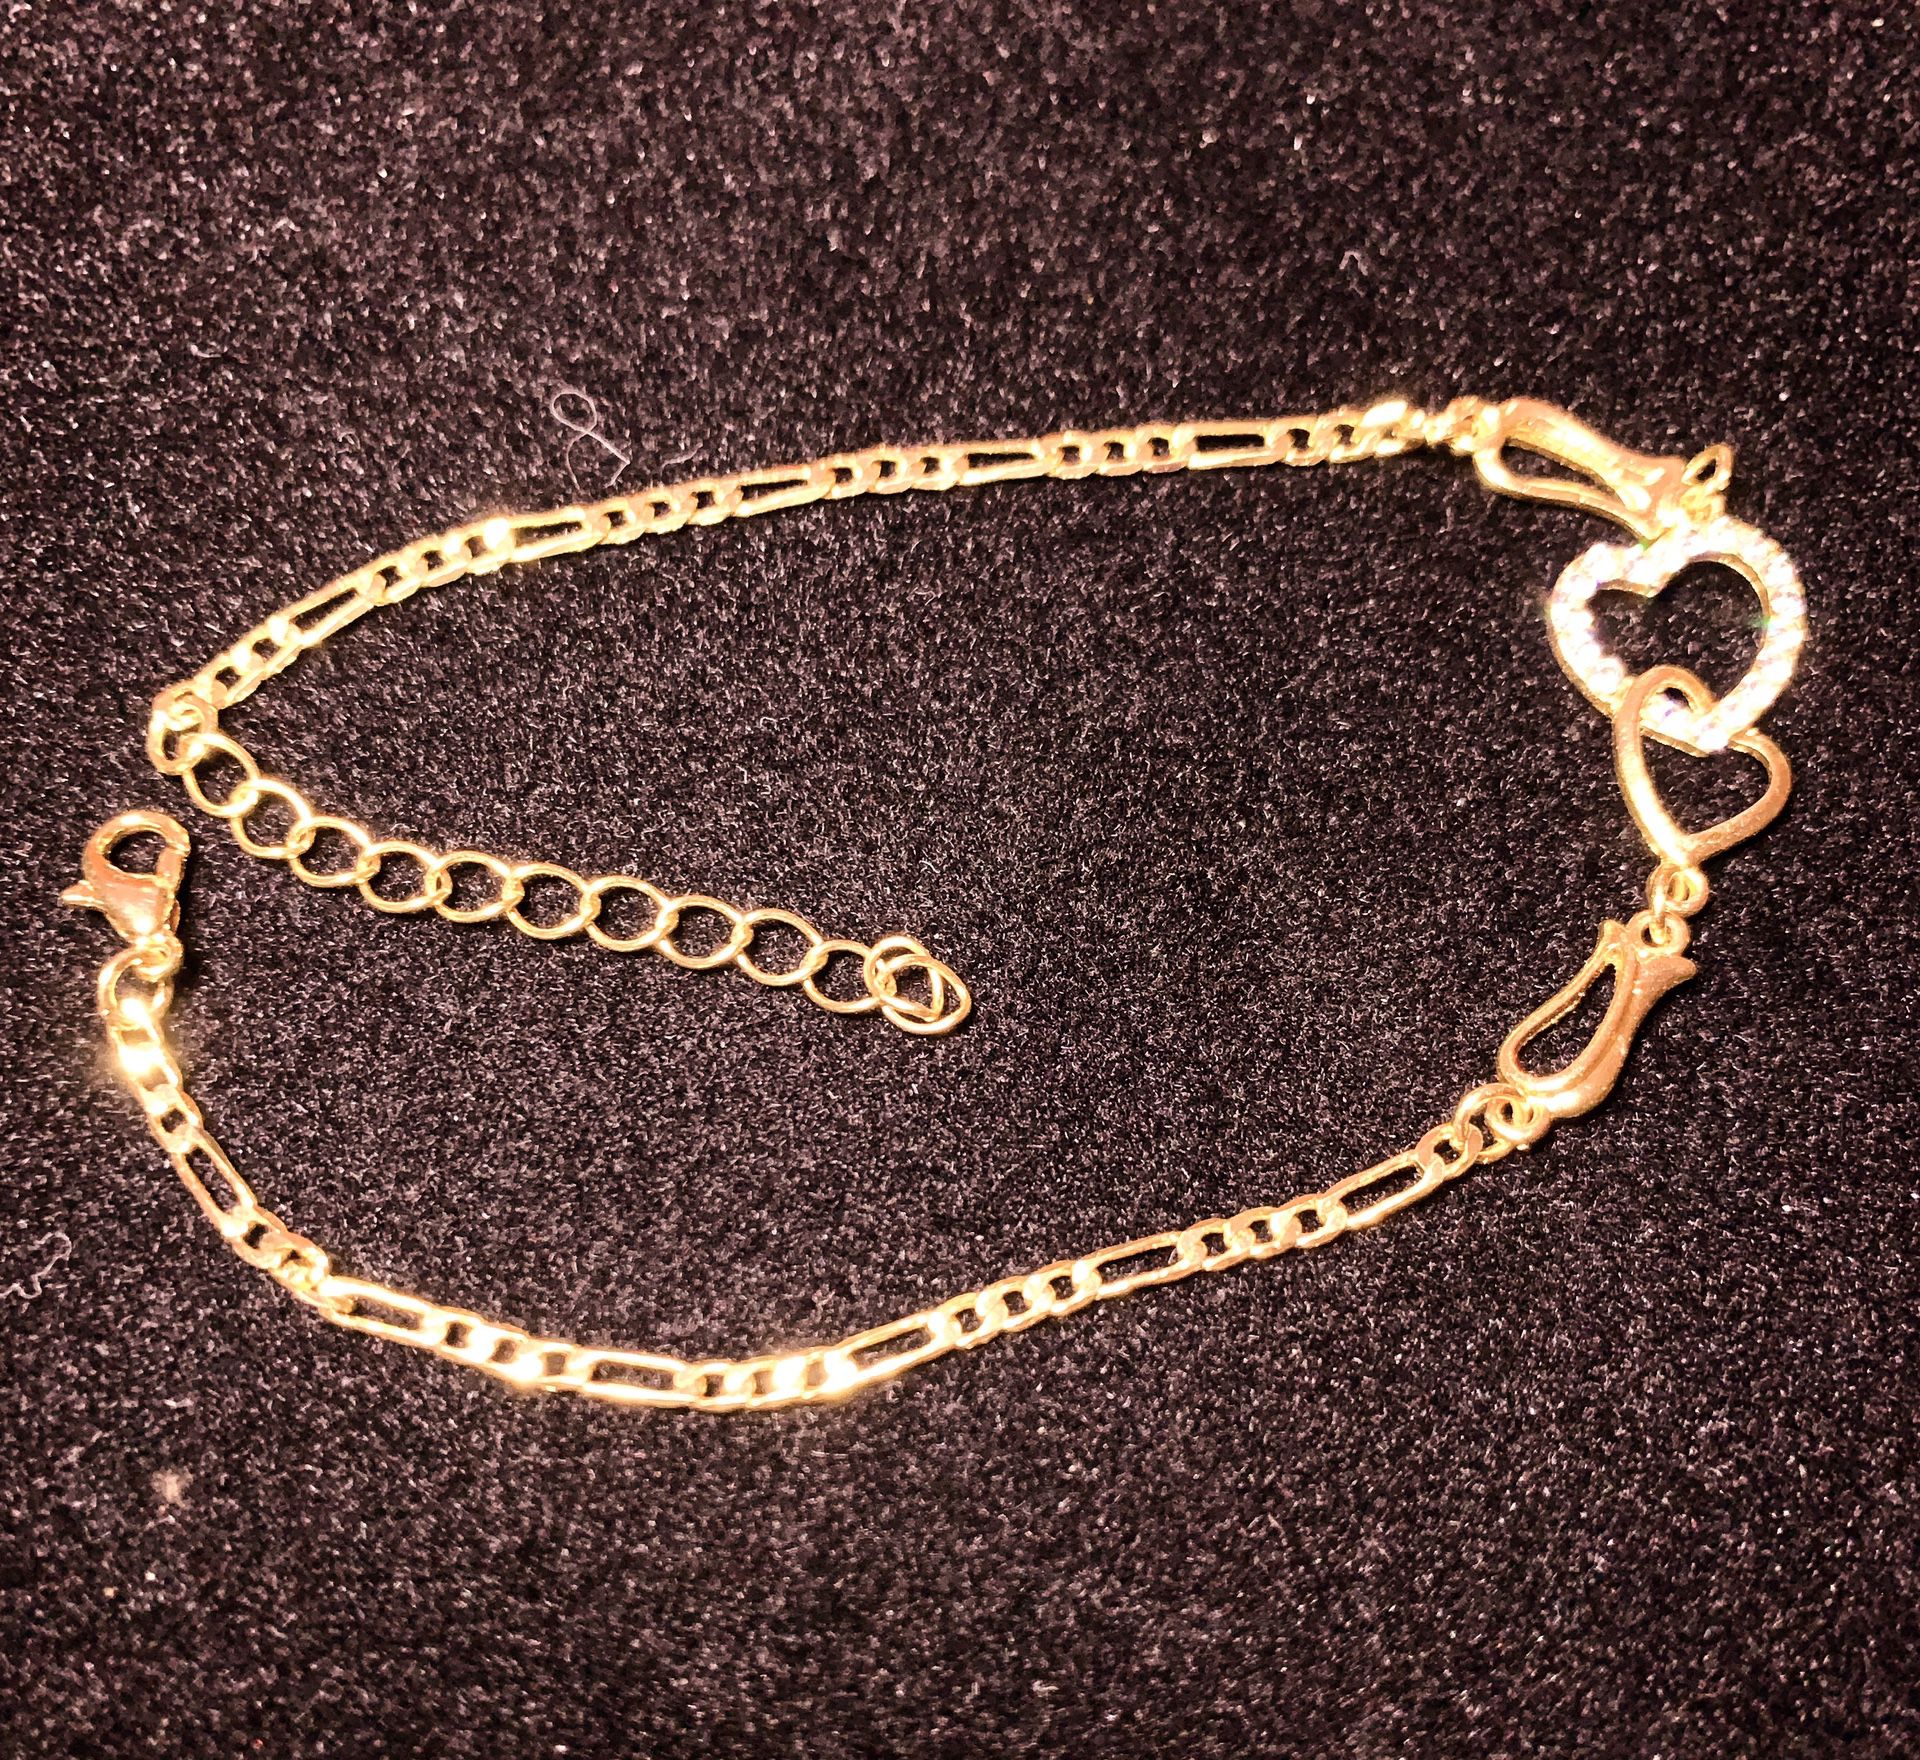 BRACELET OR ANKLET IN 18K YELLOW OR WHITE GOLD PLATED FIGARO HEART TO HEART CRYSTAL BANGLE